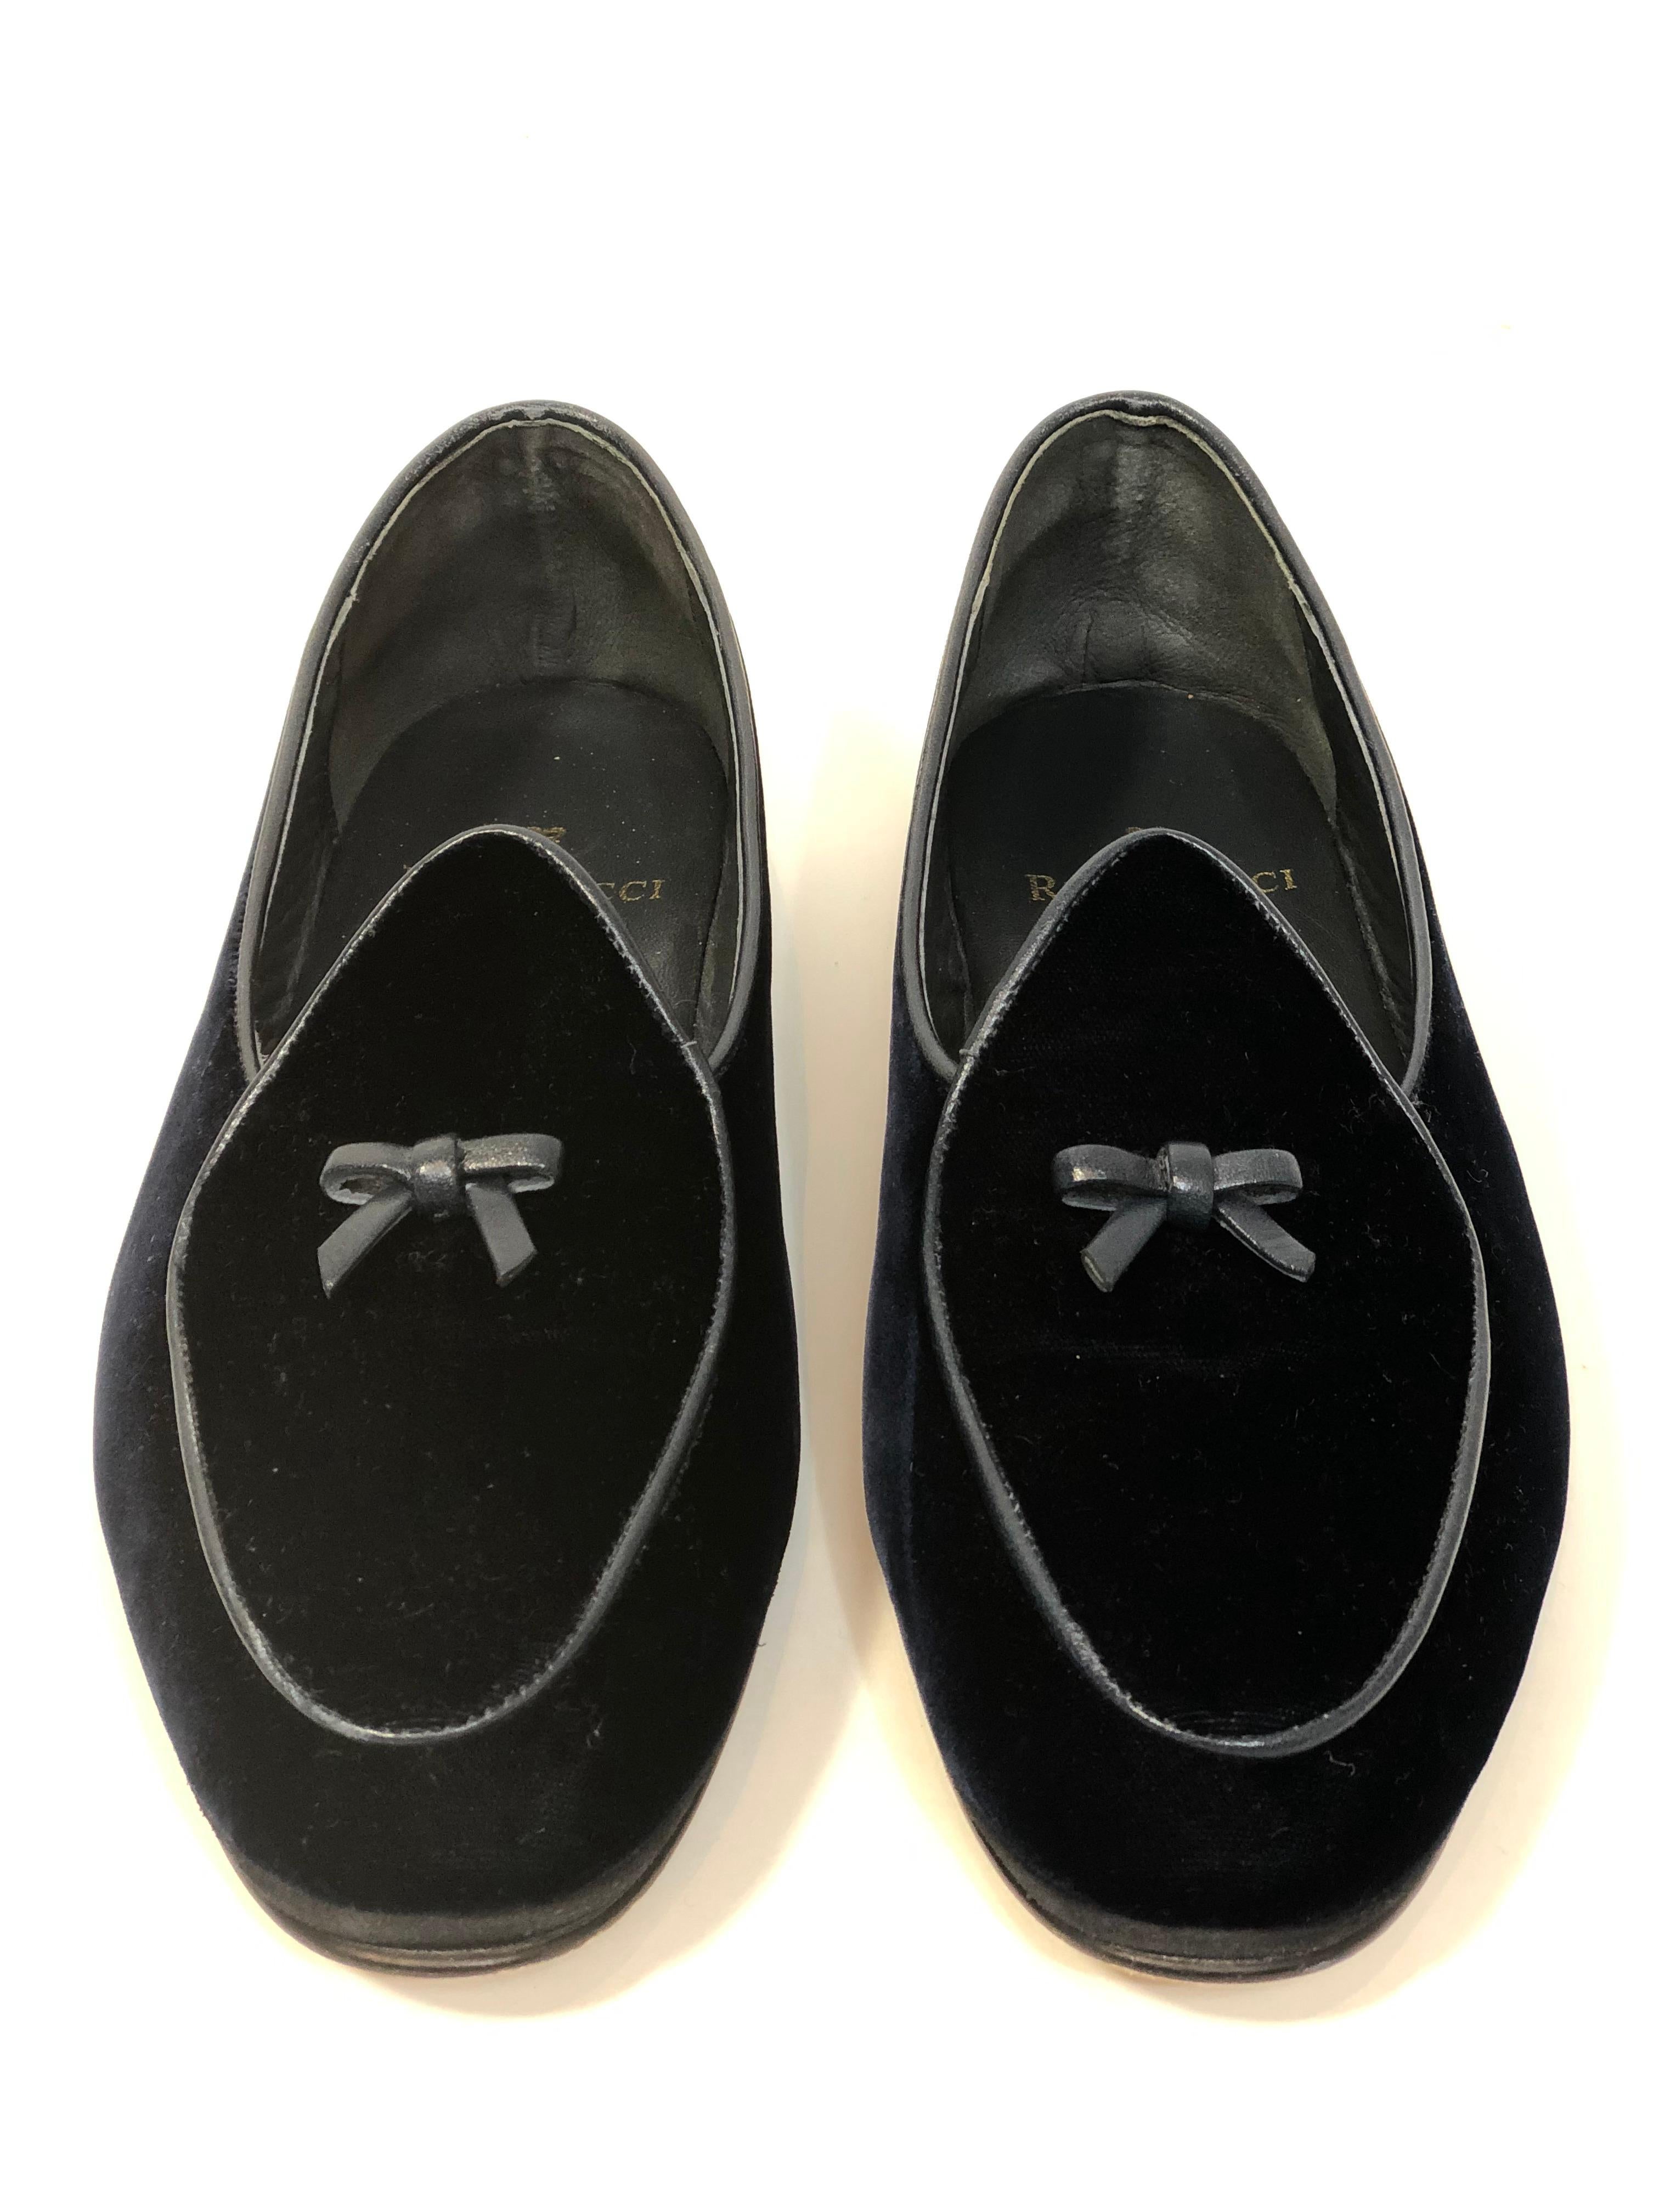 Round Toe Rubinacci Black Velvet Belgian Style Loafers with Small Leather Bow Detail 
Size 42.5